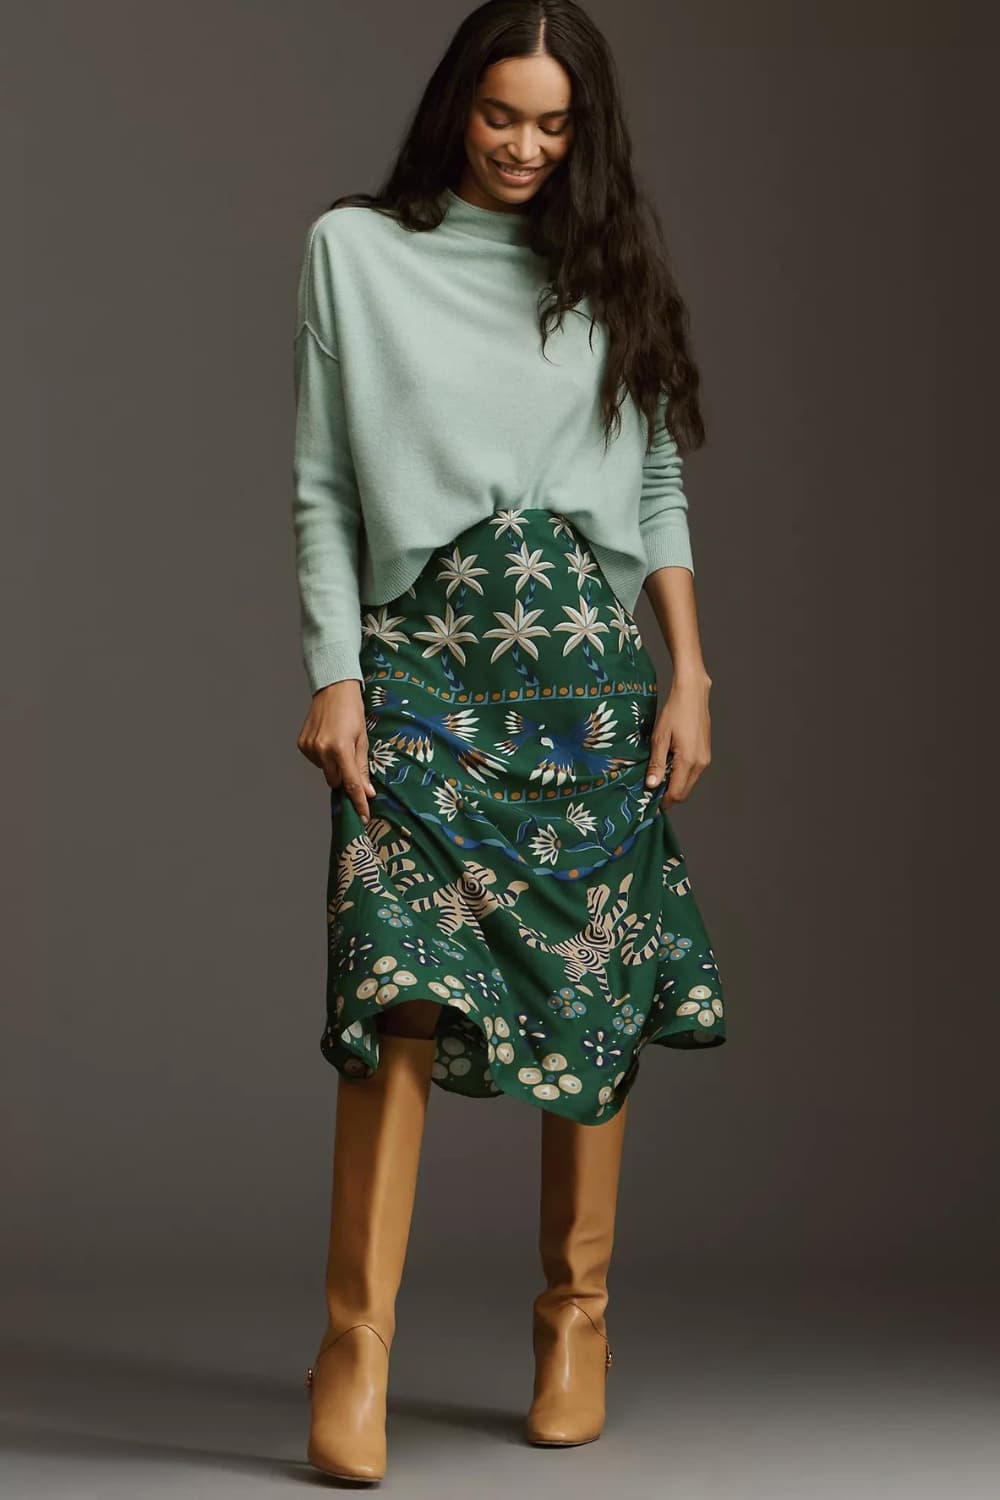 Casual Thanksgiving Outfit Idea - Printed Satin skirt with oversized sweater